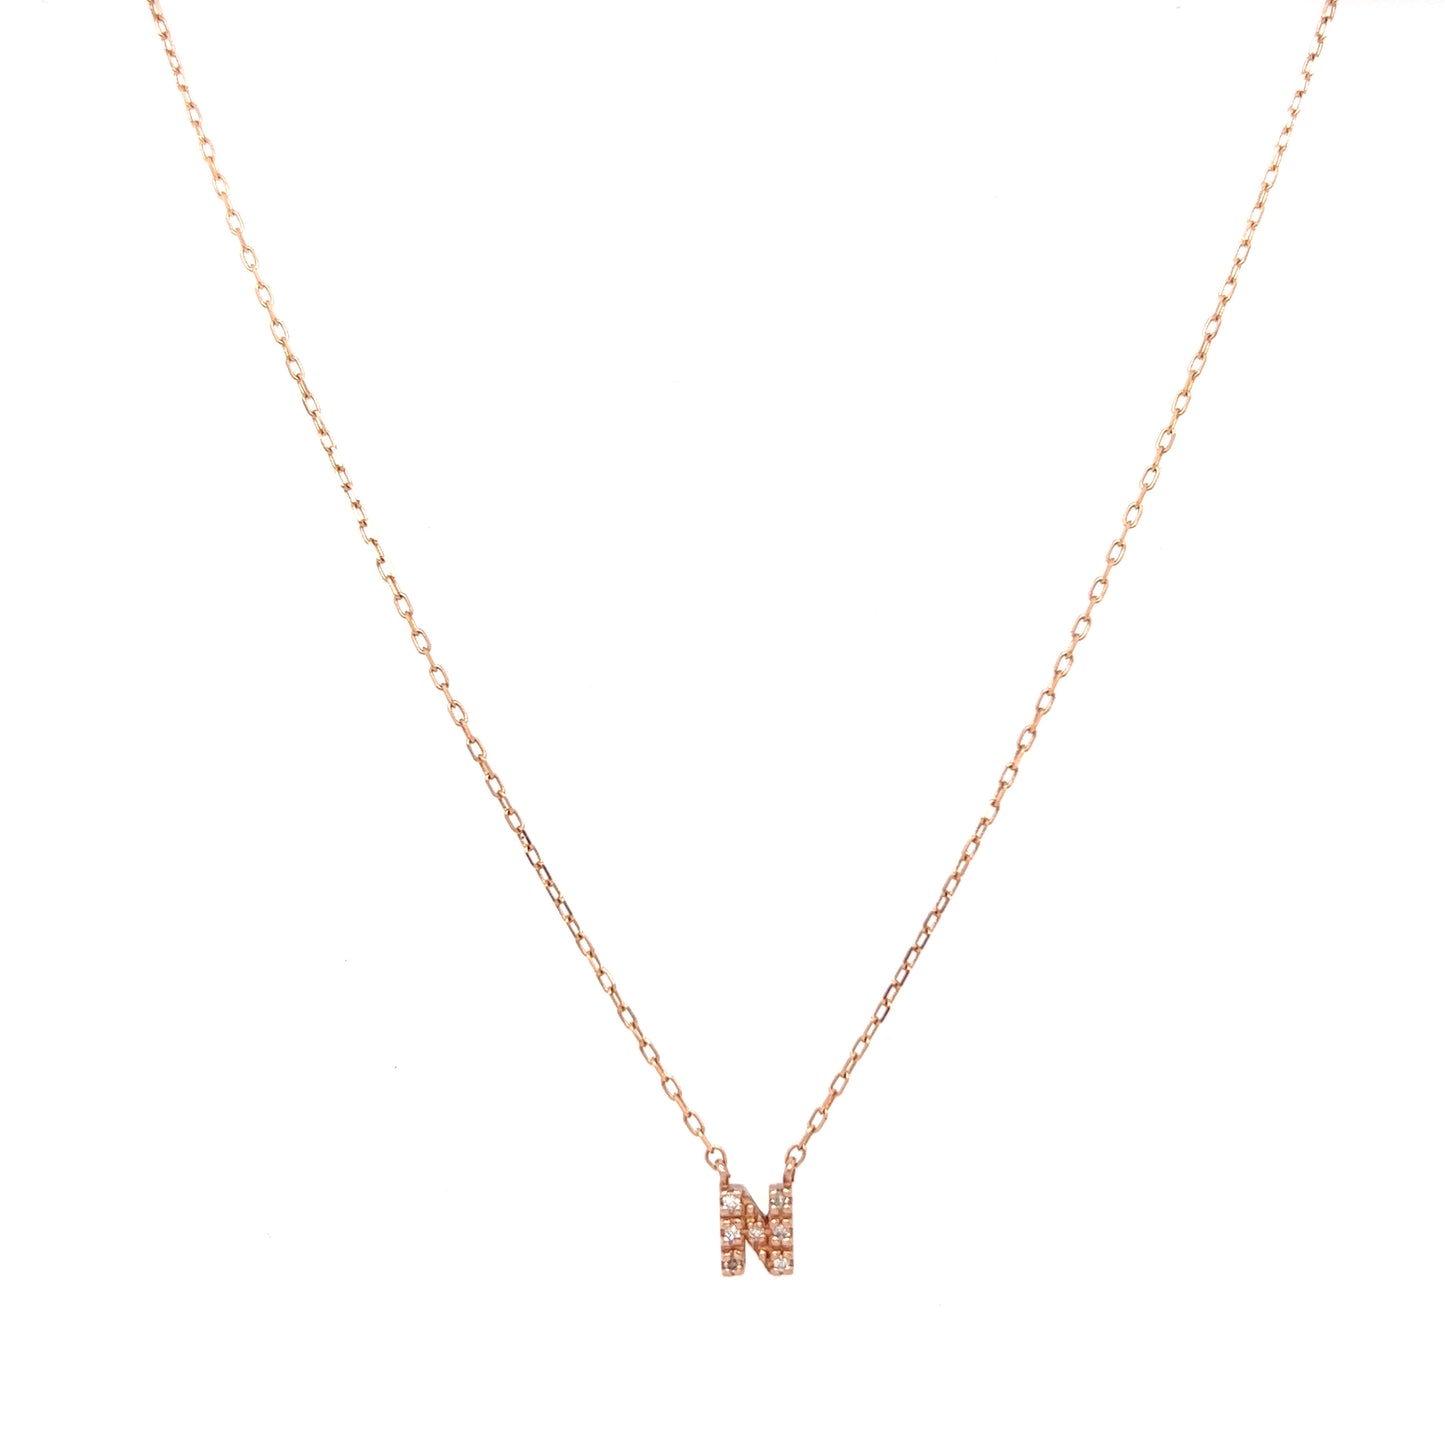 Initial letter Diamond necklace